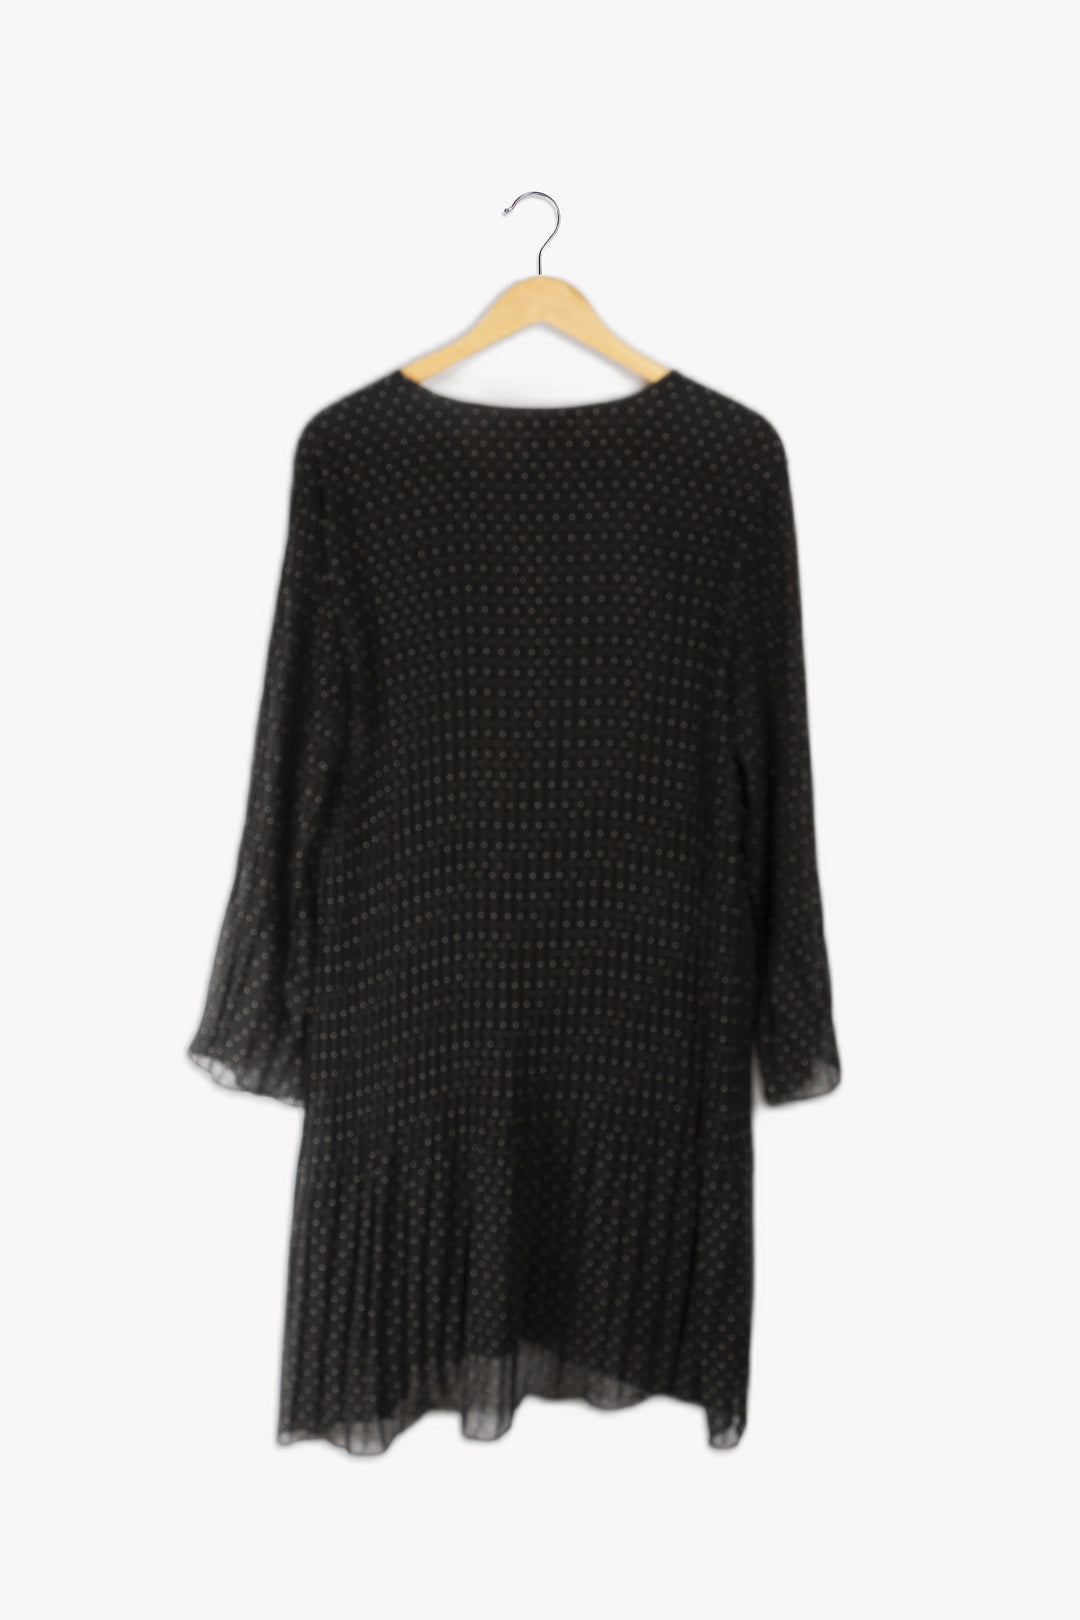 Short pleated dress with long sleeves - M/38